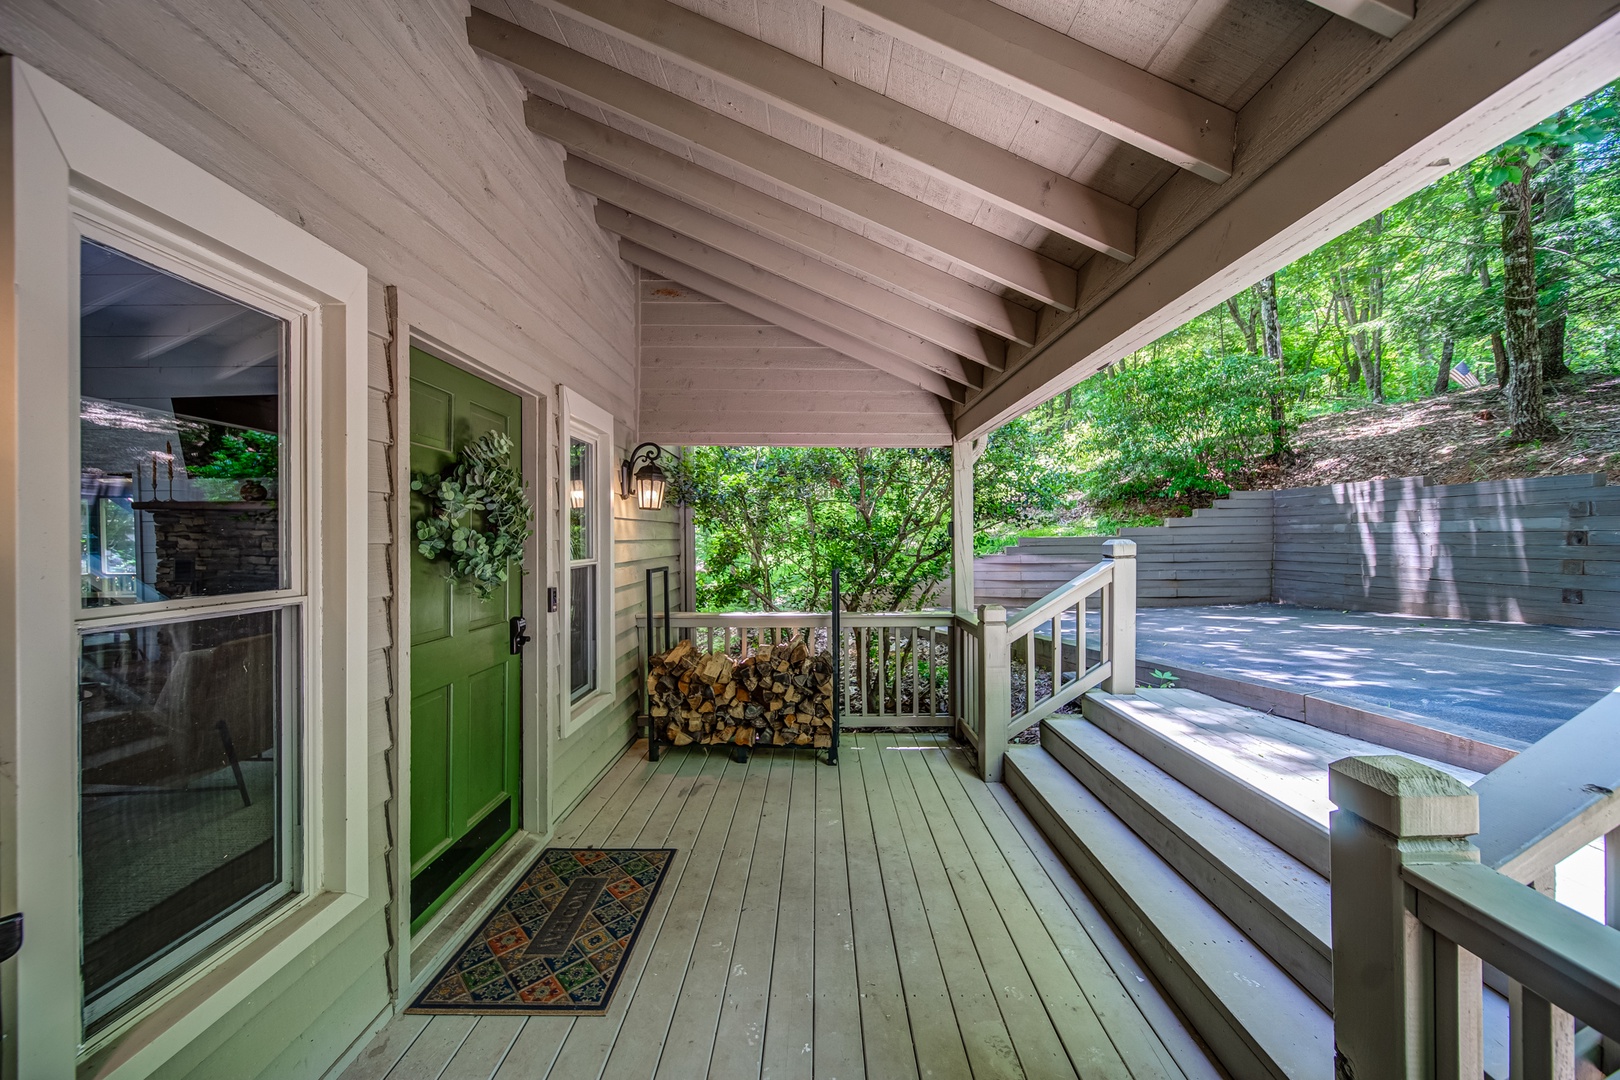 Find comfortable entry and plenty of firewood on the sprawling front porch